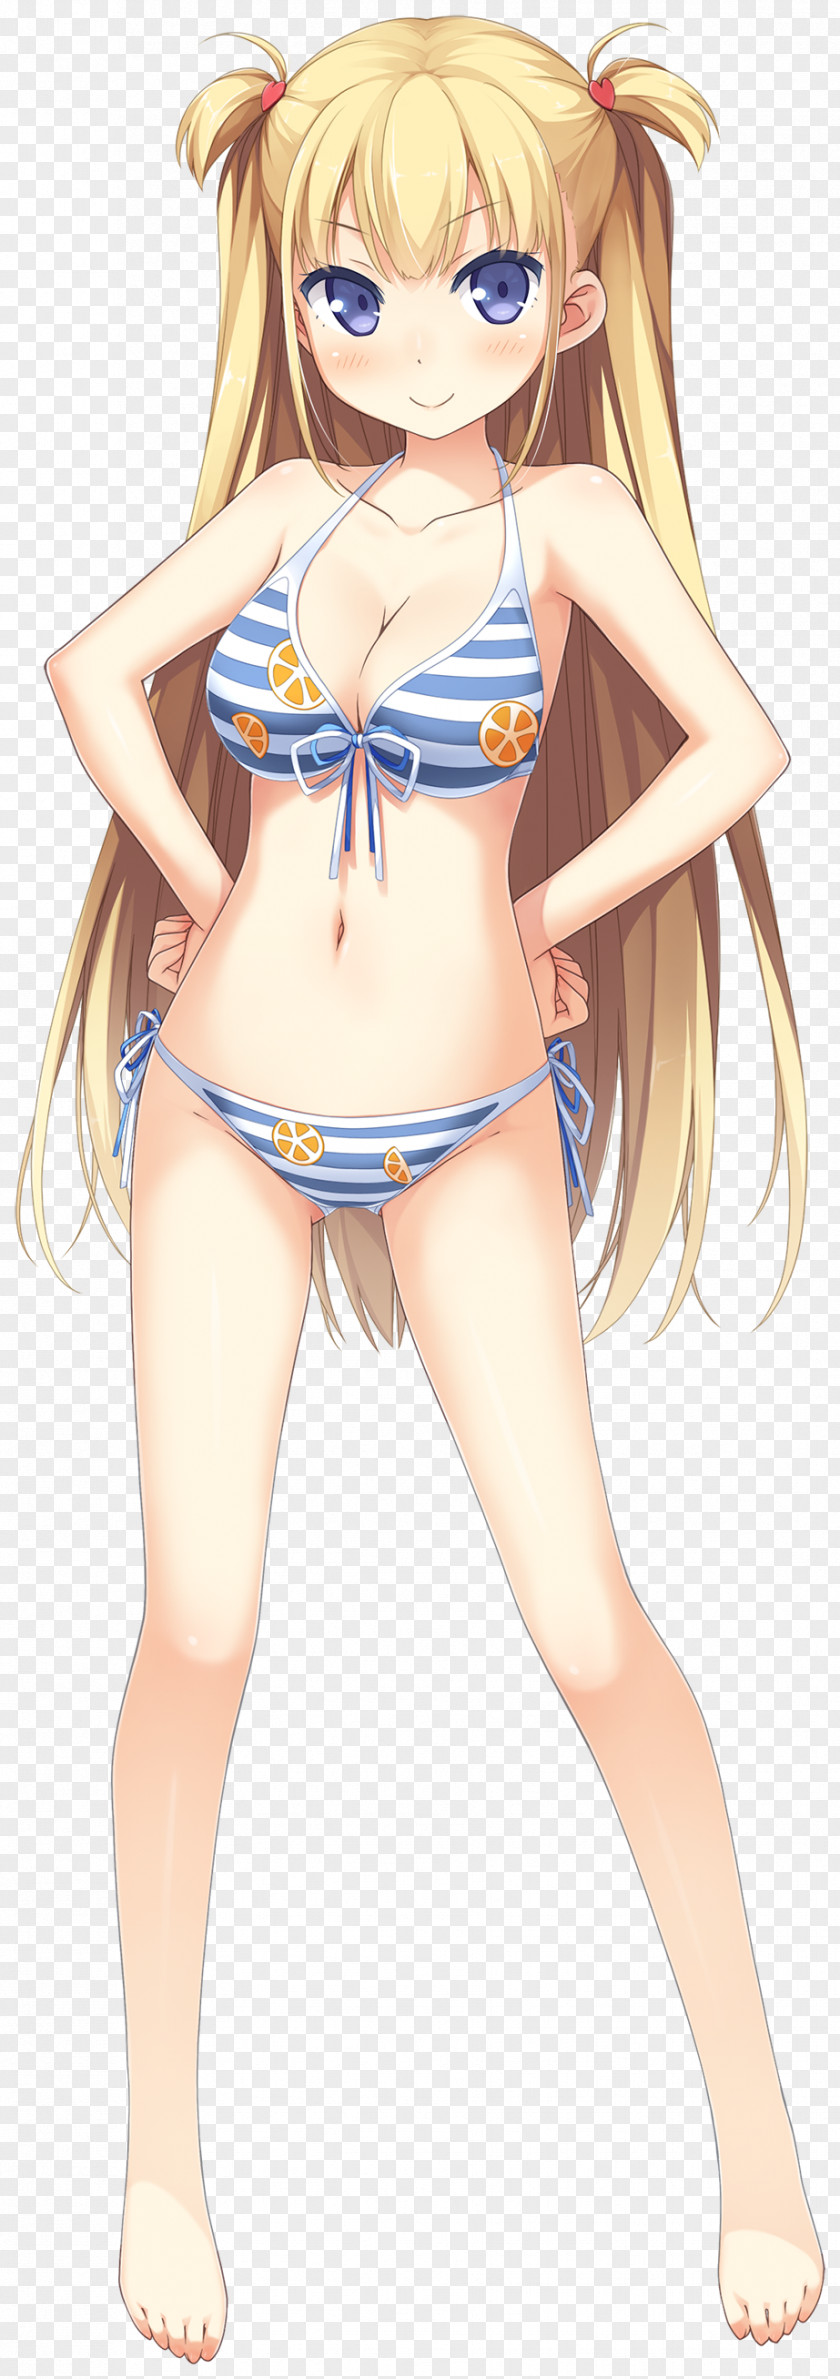 Swimsuit Brown Hair Blond Black Body PNG